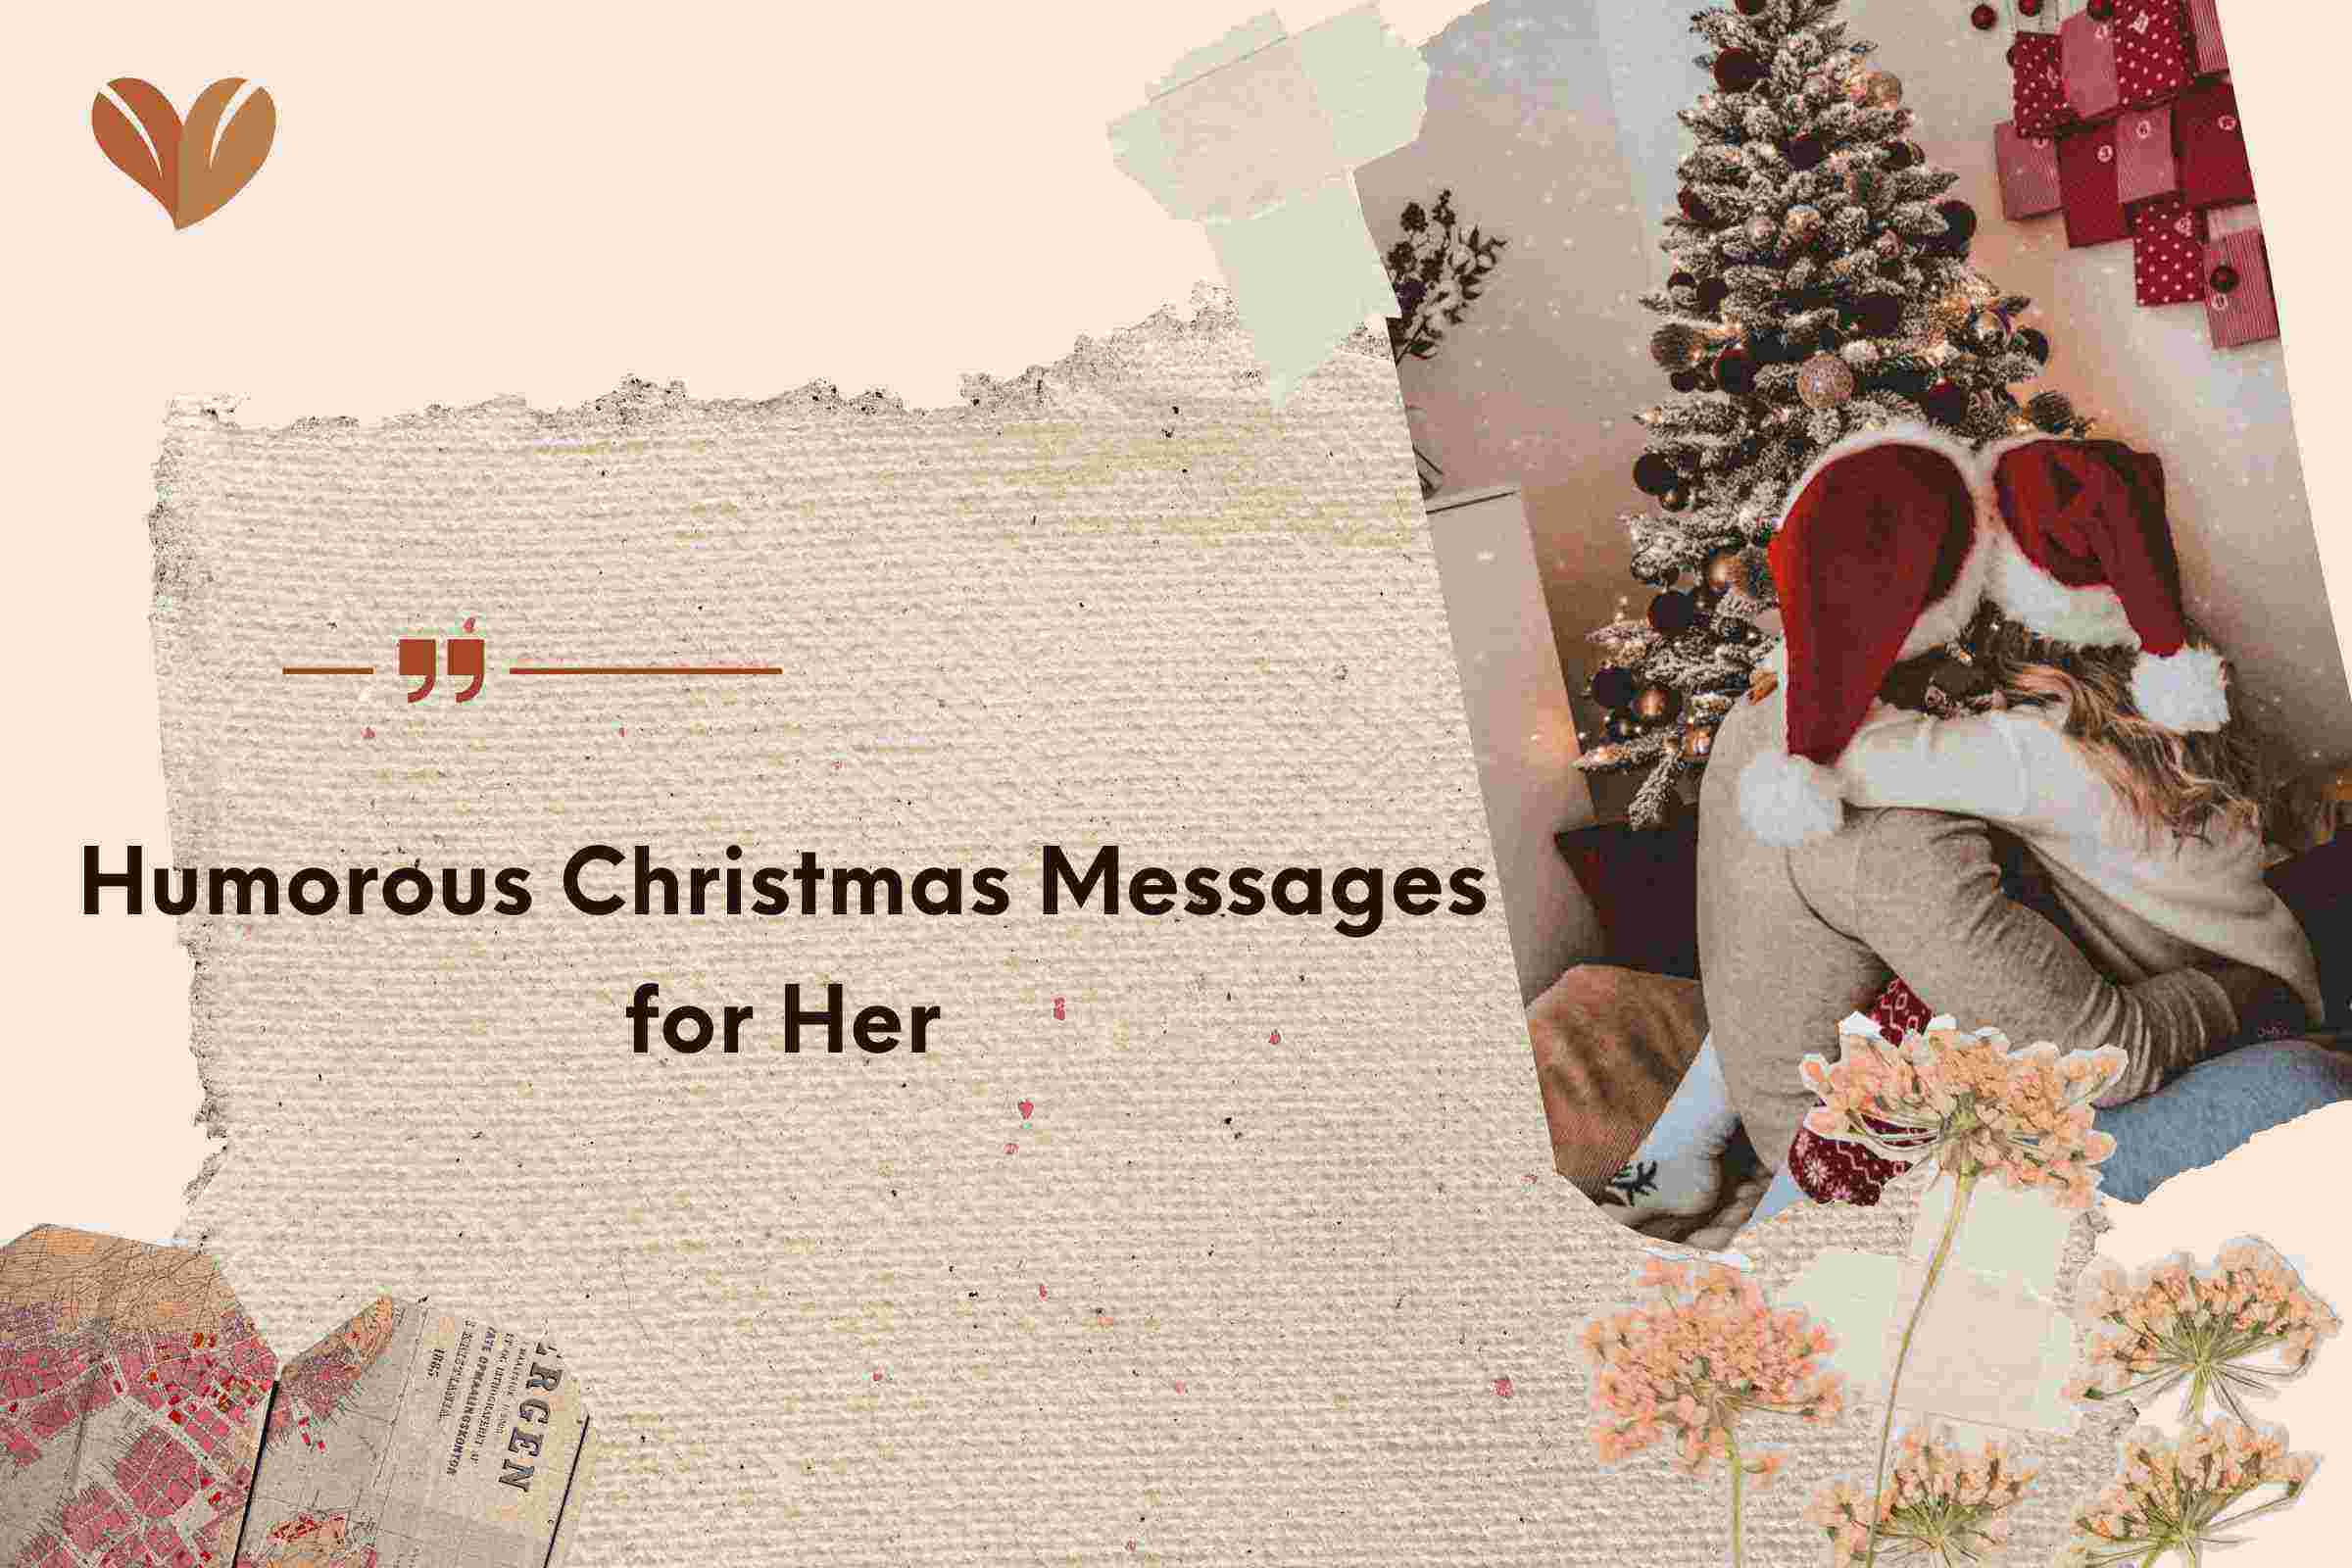 Humorous Christmas Messages for Her